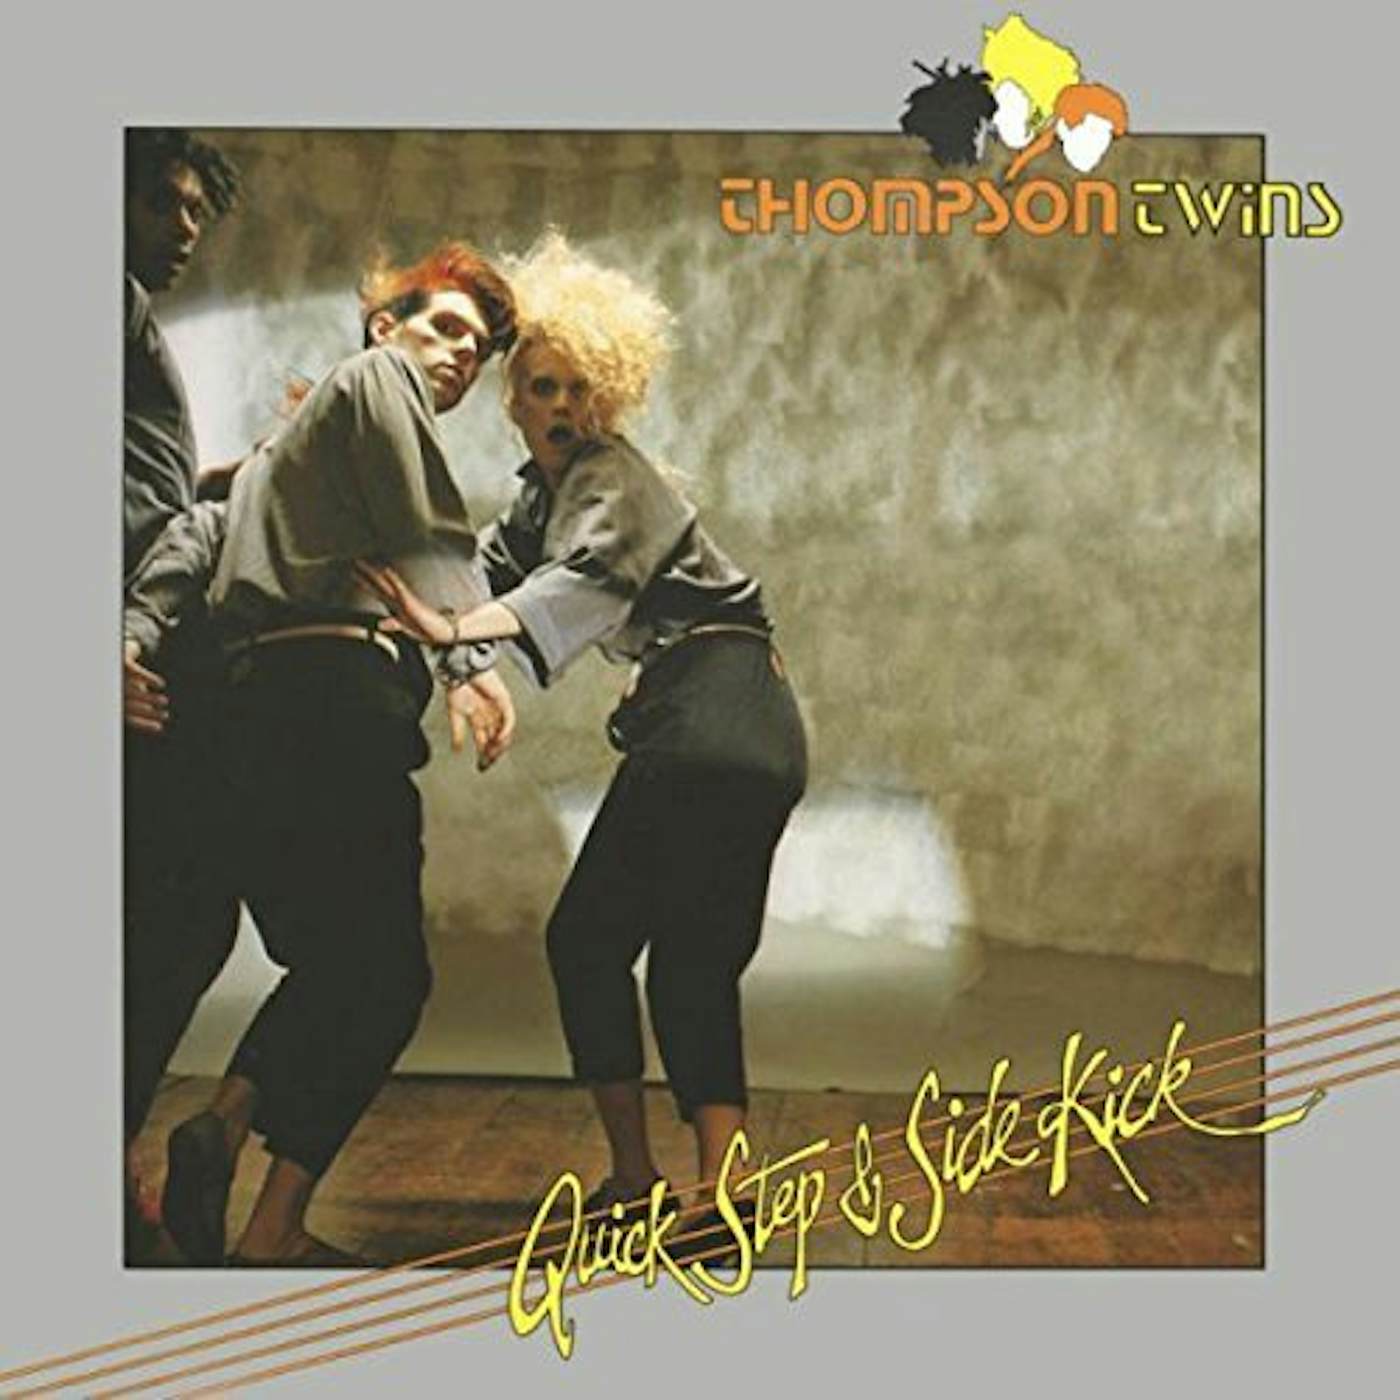 Thompson Twins Quick Step And Side Kick Vinyl Record